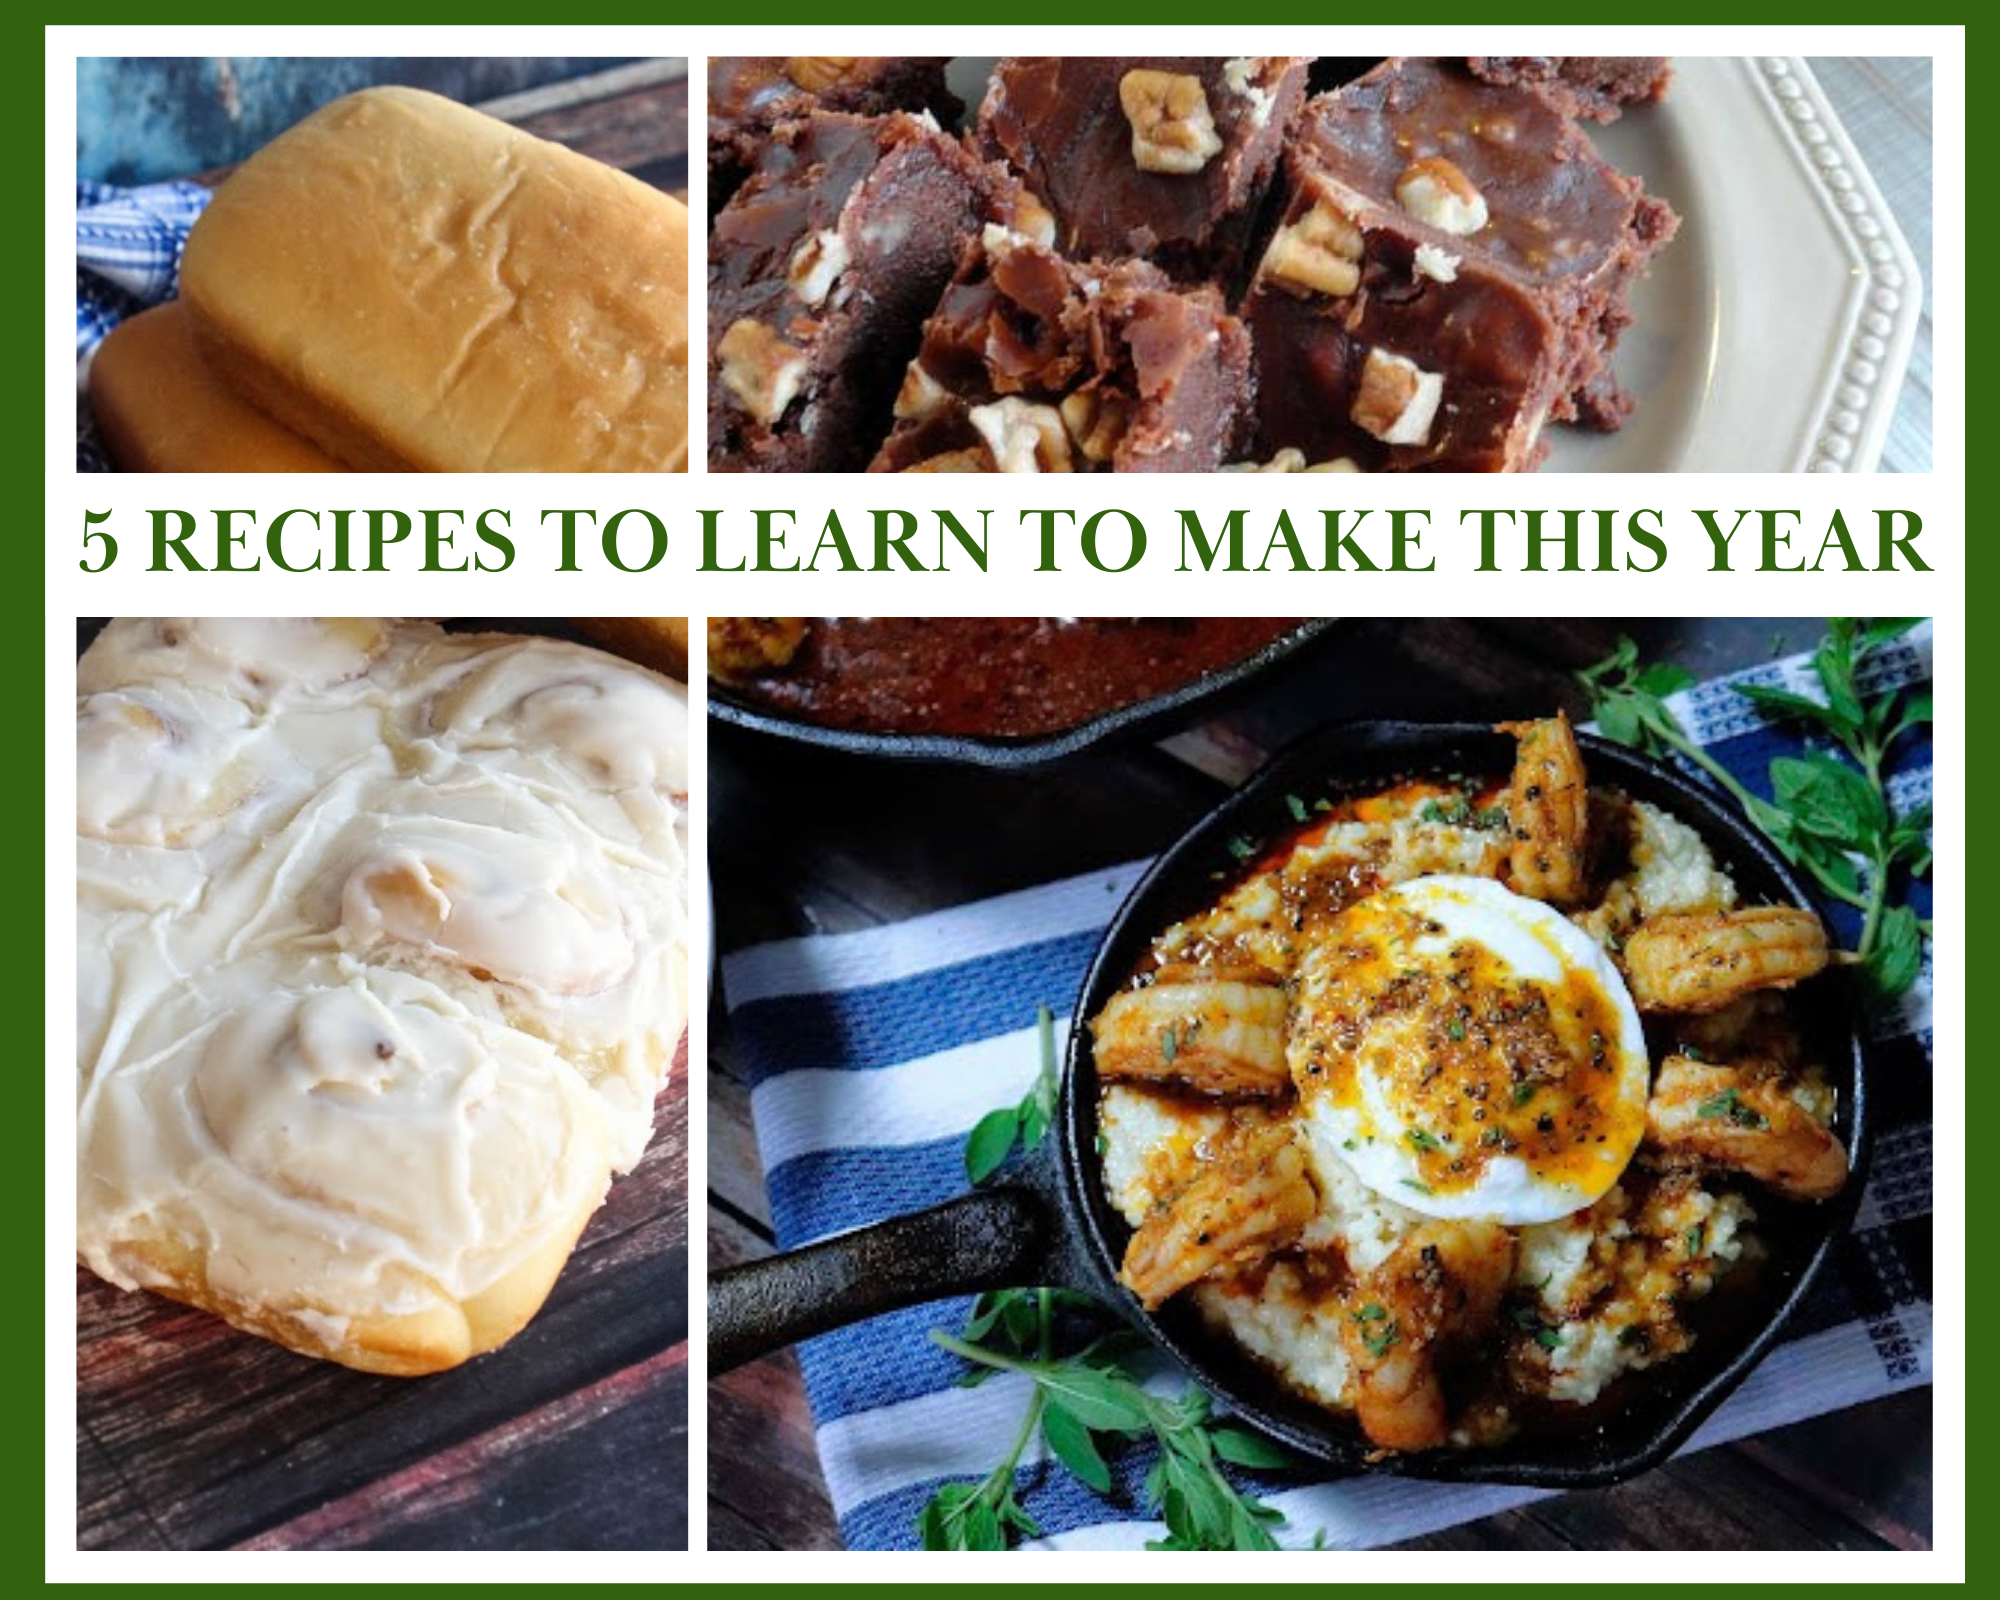 5 Recipes to Learn to Make this Year